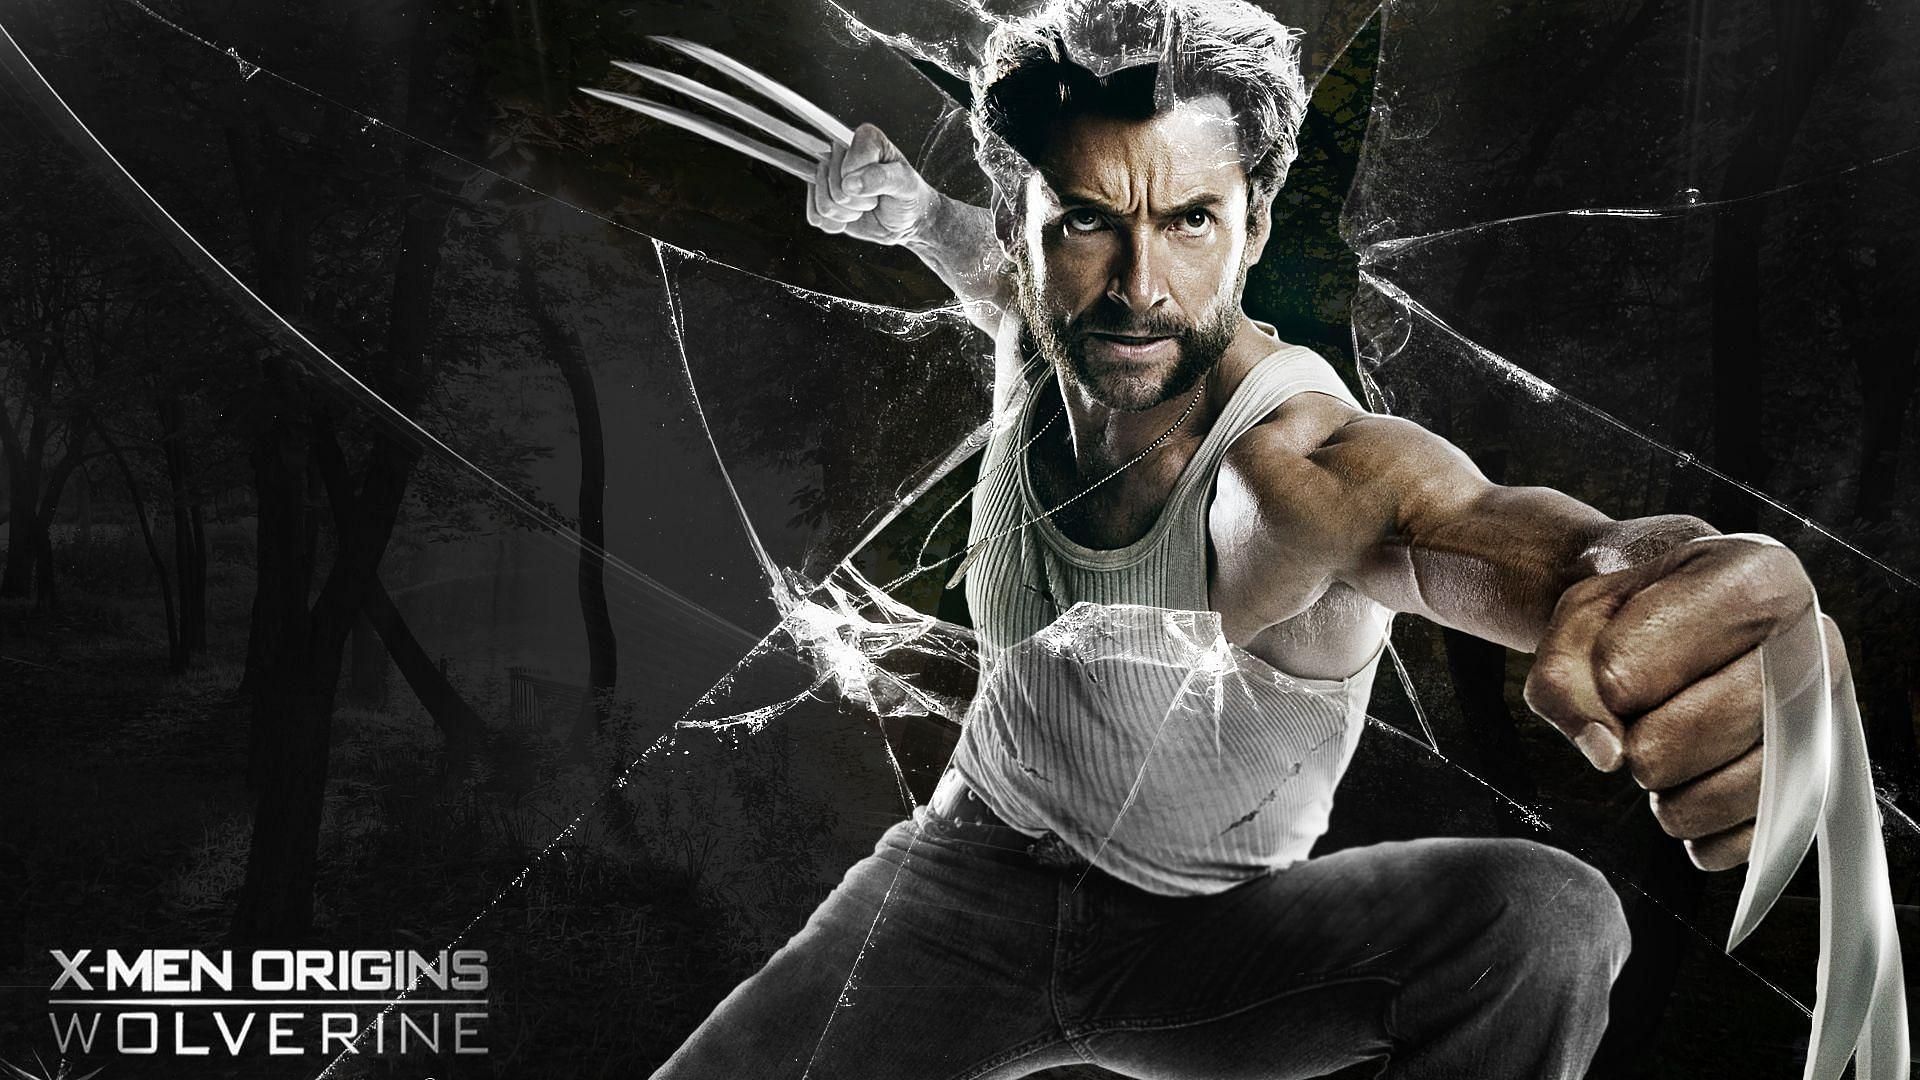 The movie marks the beginning of the Wolverine trilogy. (Image via Marvel)